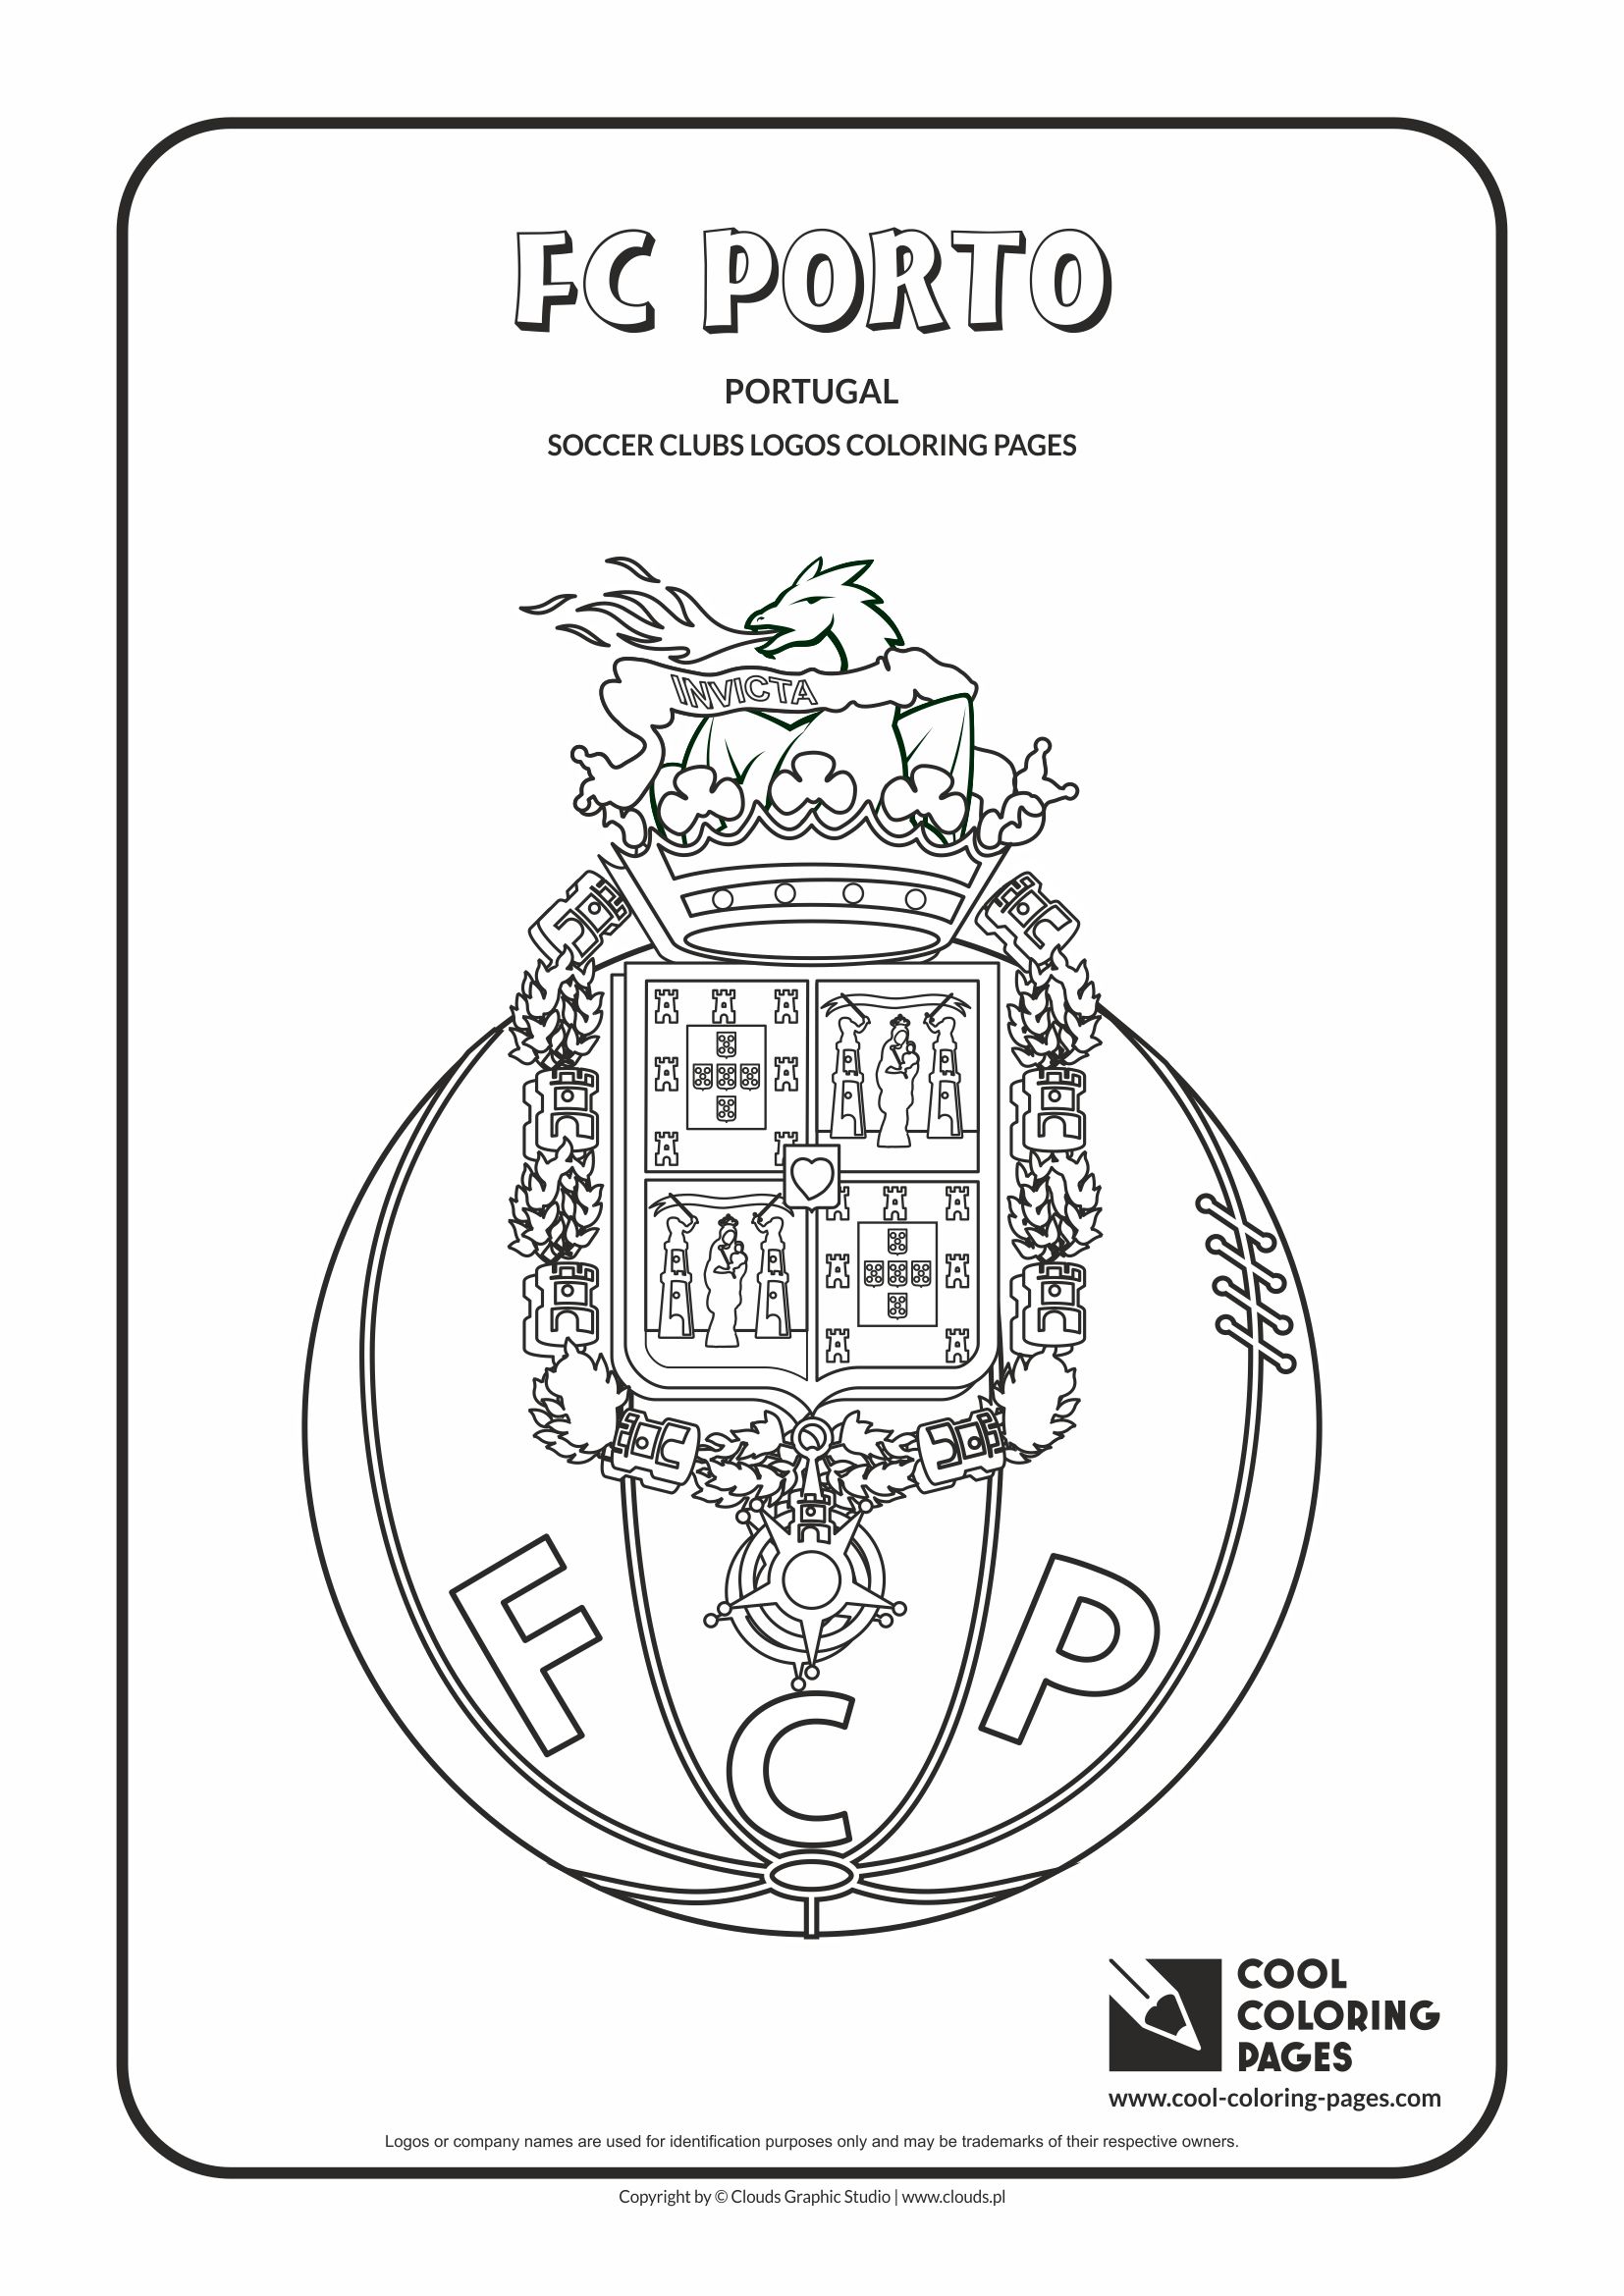 FC Porto logo coloring / Coloring page with FC Porto logo / FC Porto logo colouring page.